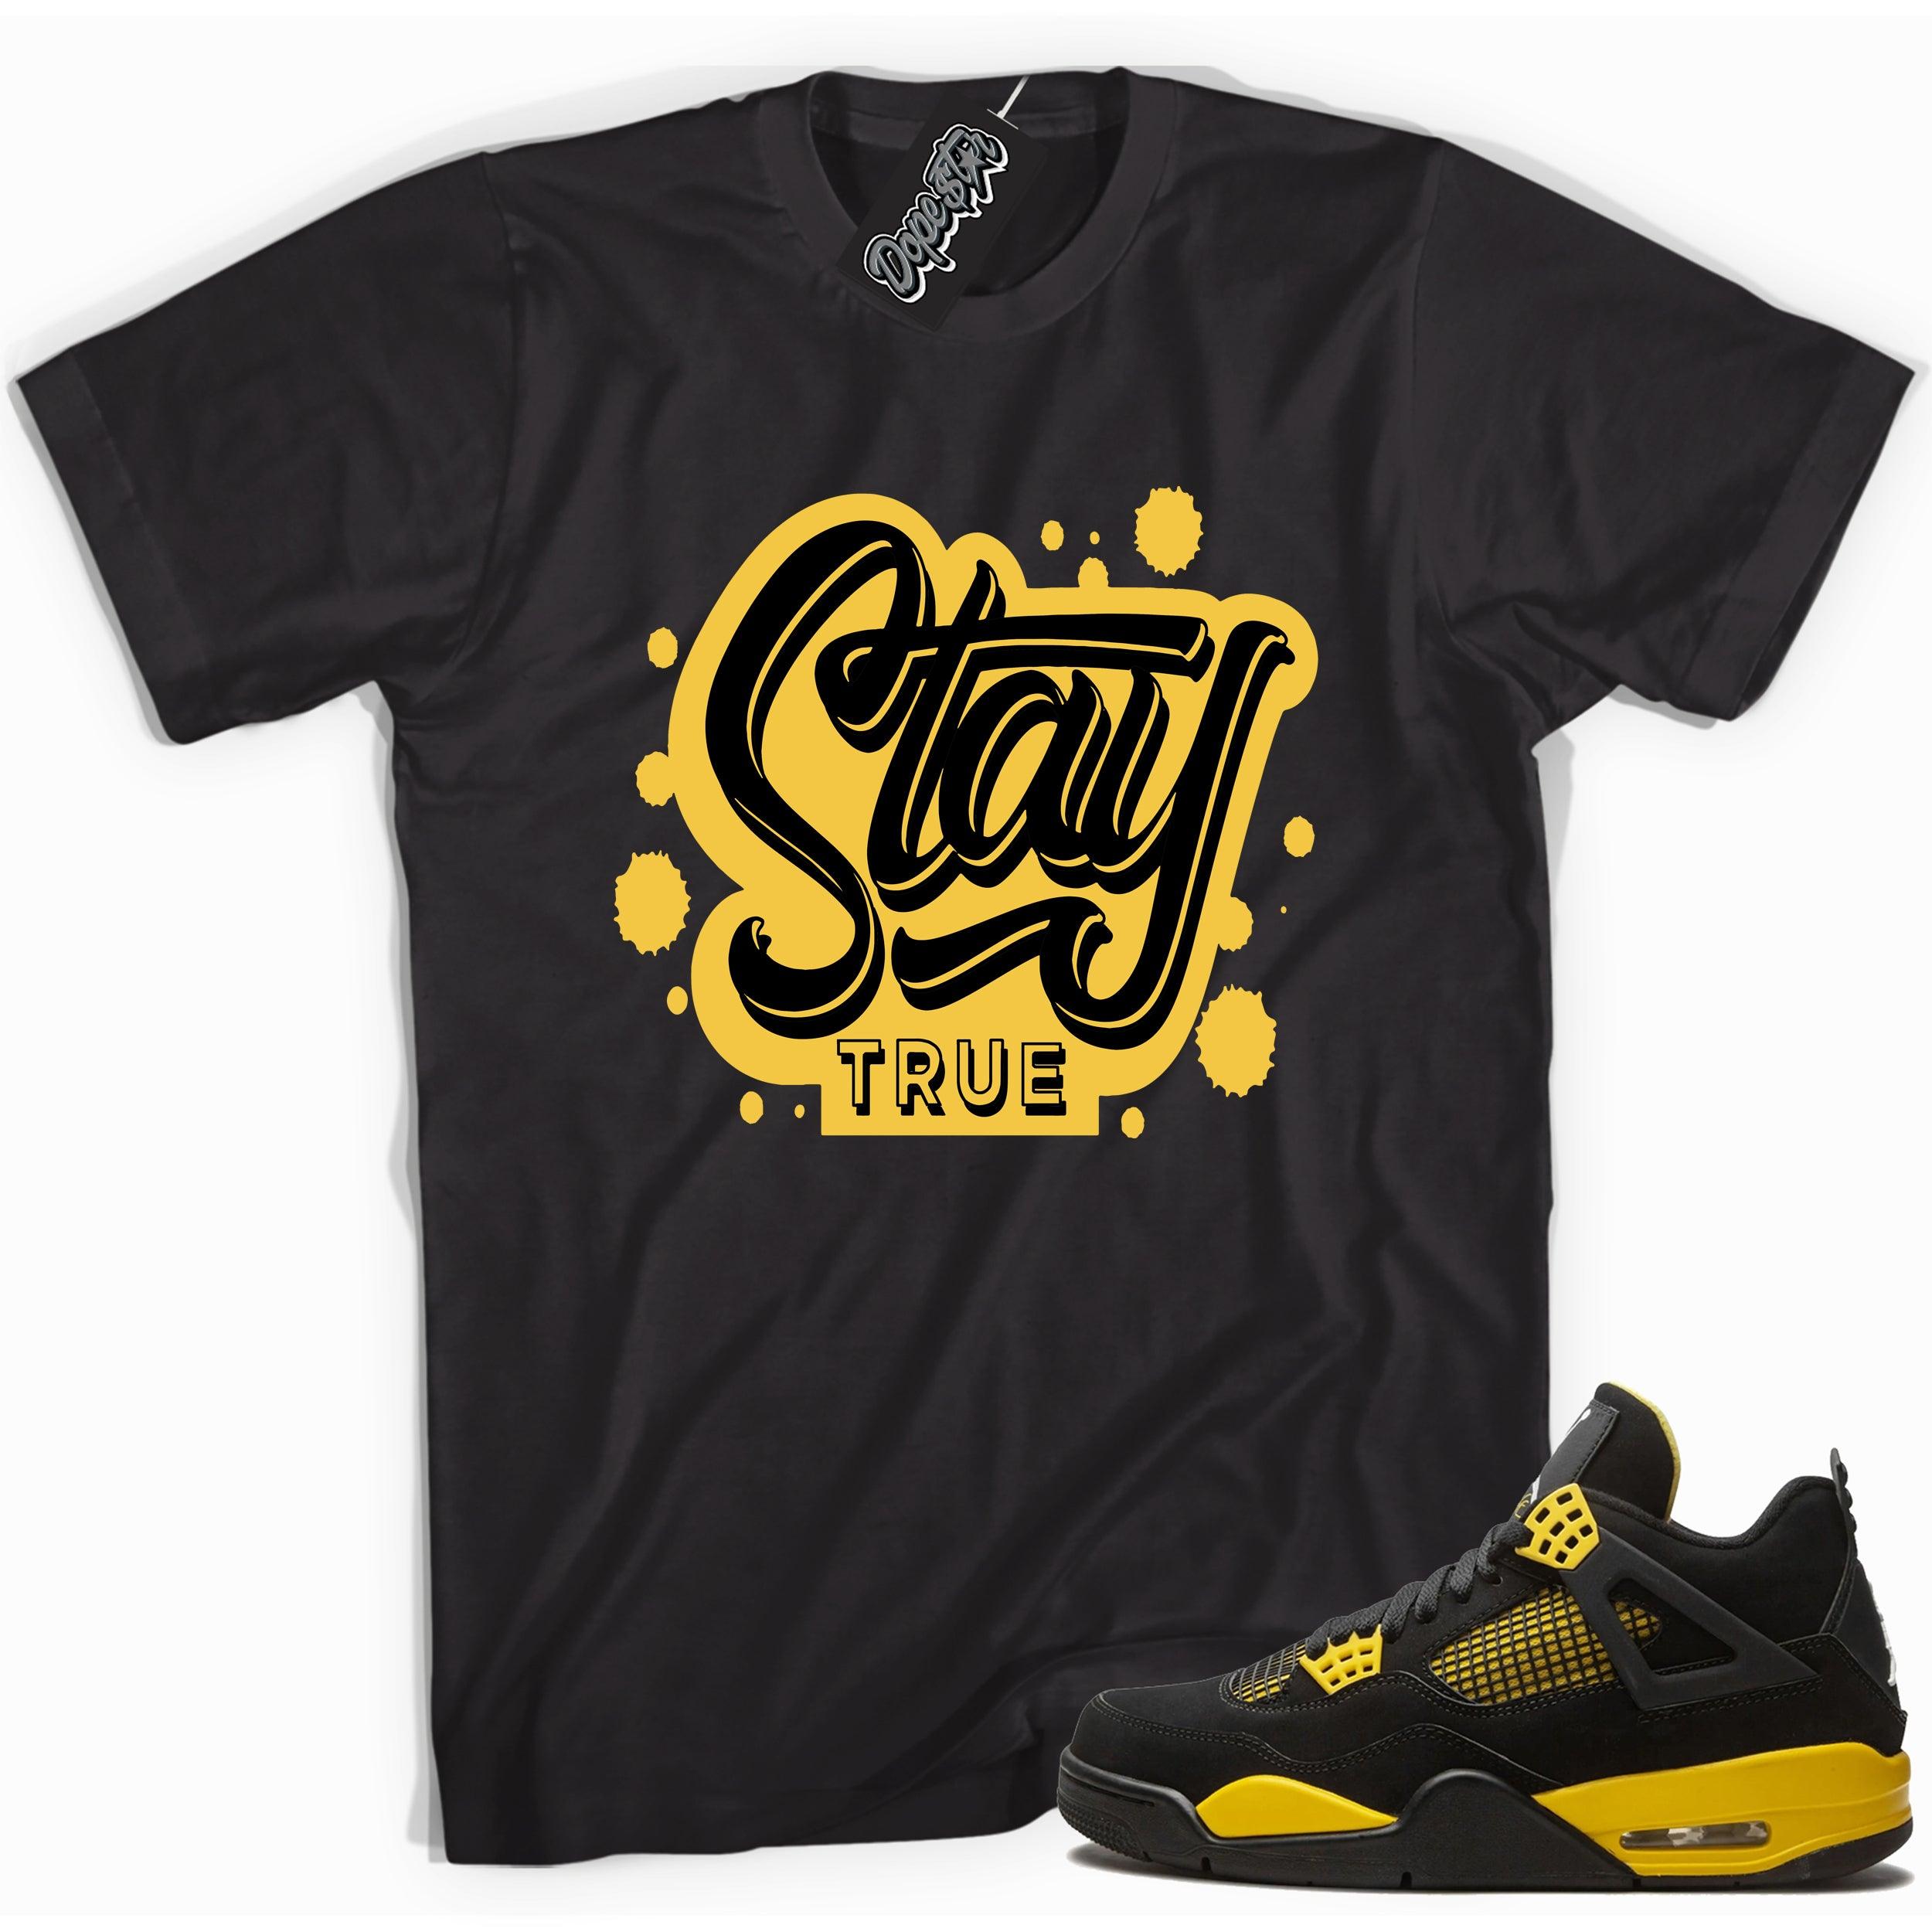 Cool black graphic tee with 'stay true' print, that perfectly matches  Air Jordan 4 Thunder sneakers